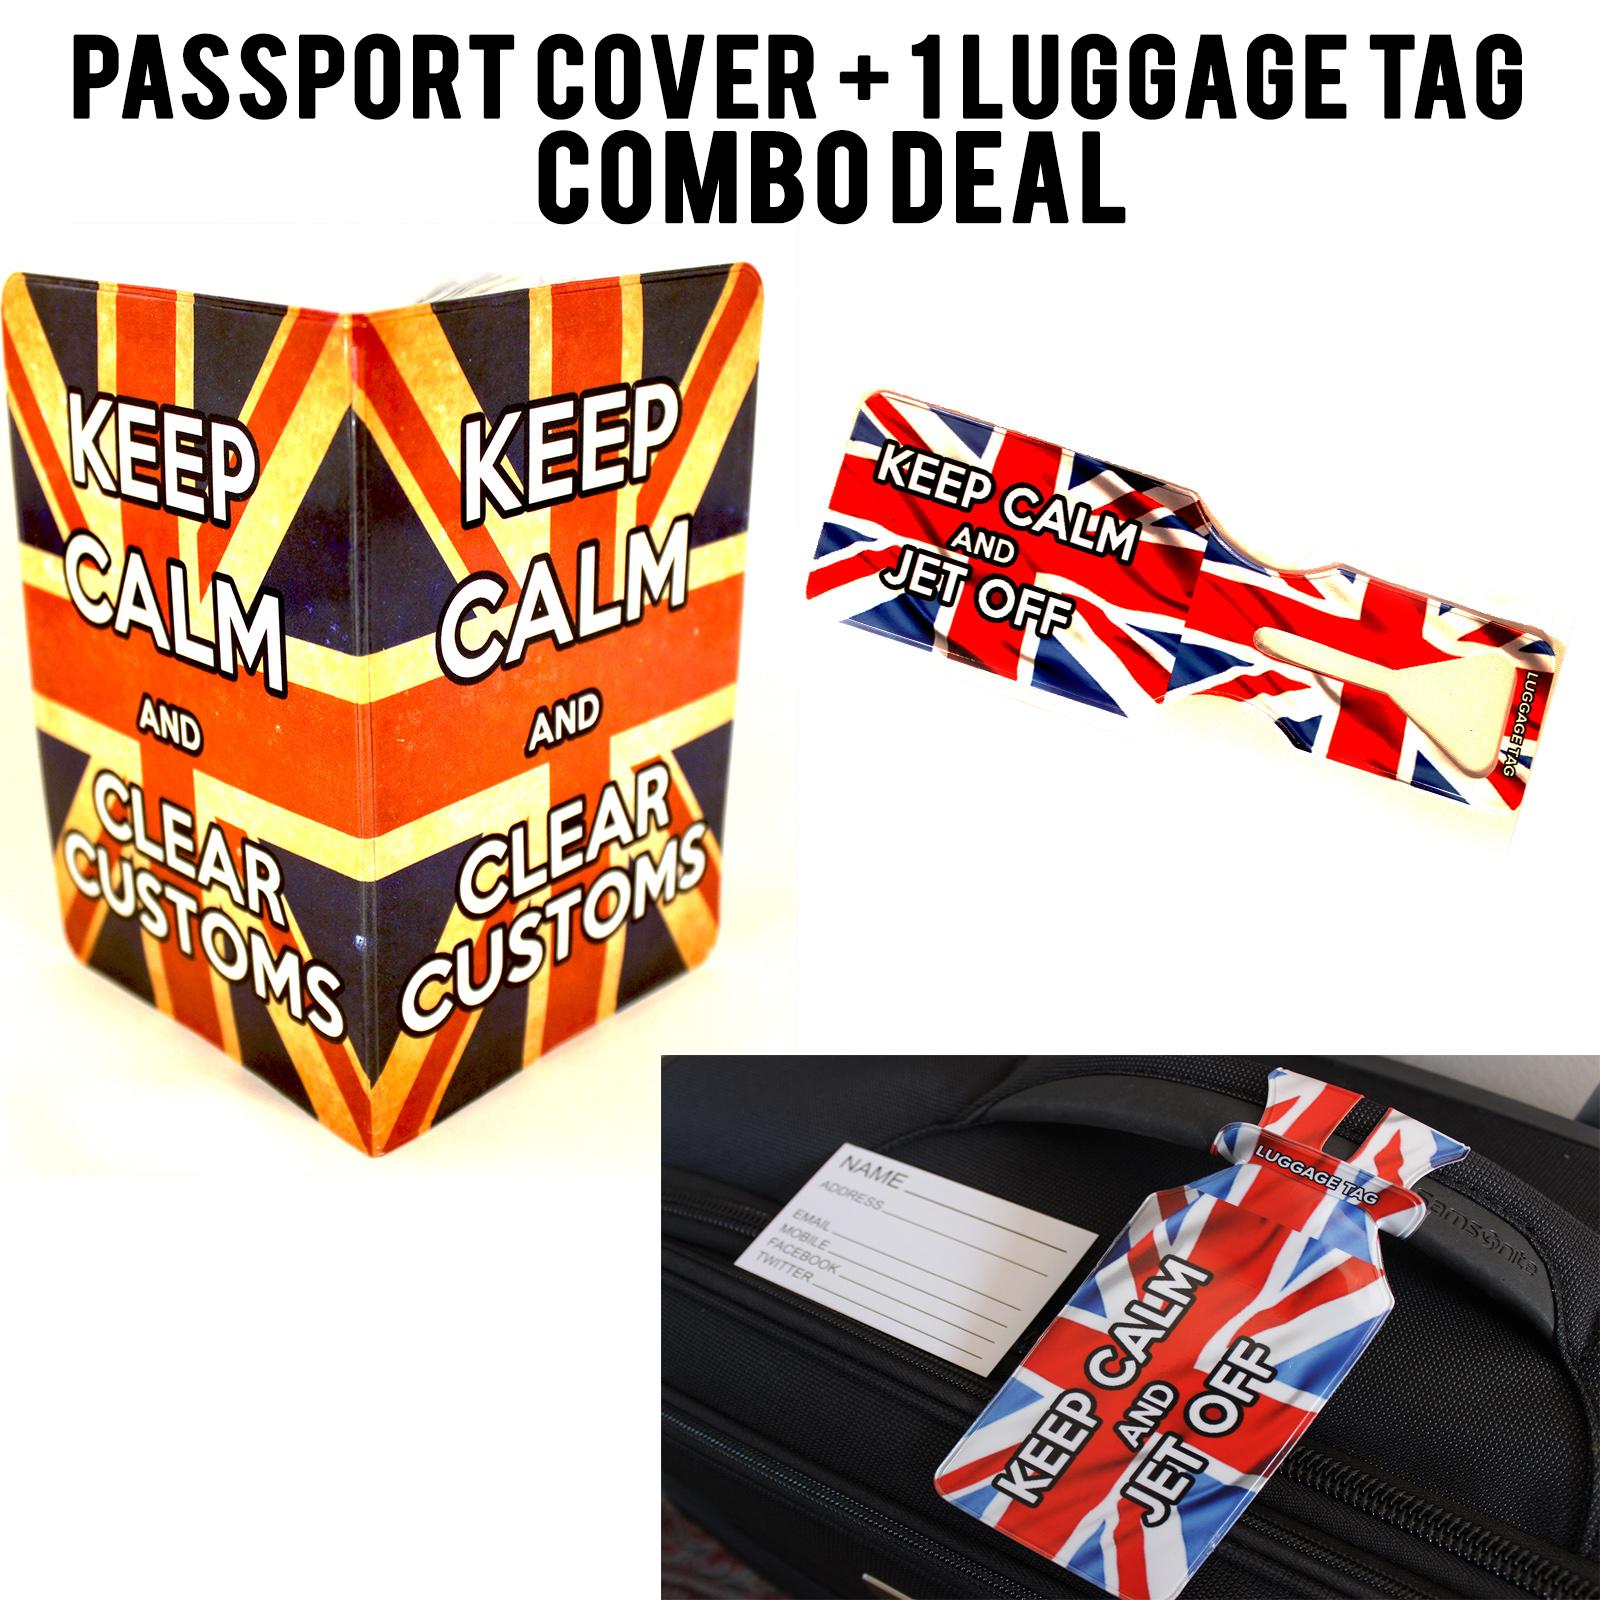 Keep Calm Union Jack Passport Cover and Luggage Tag Set annotated